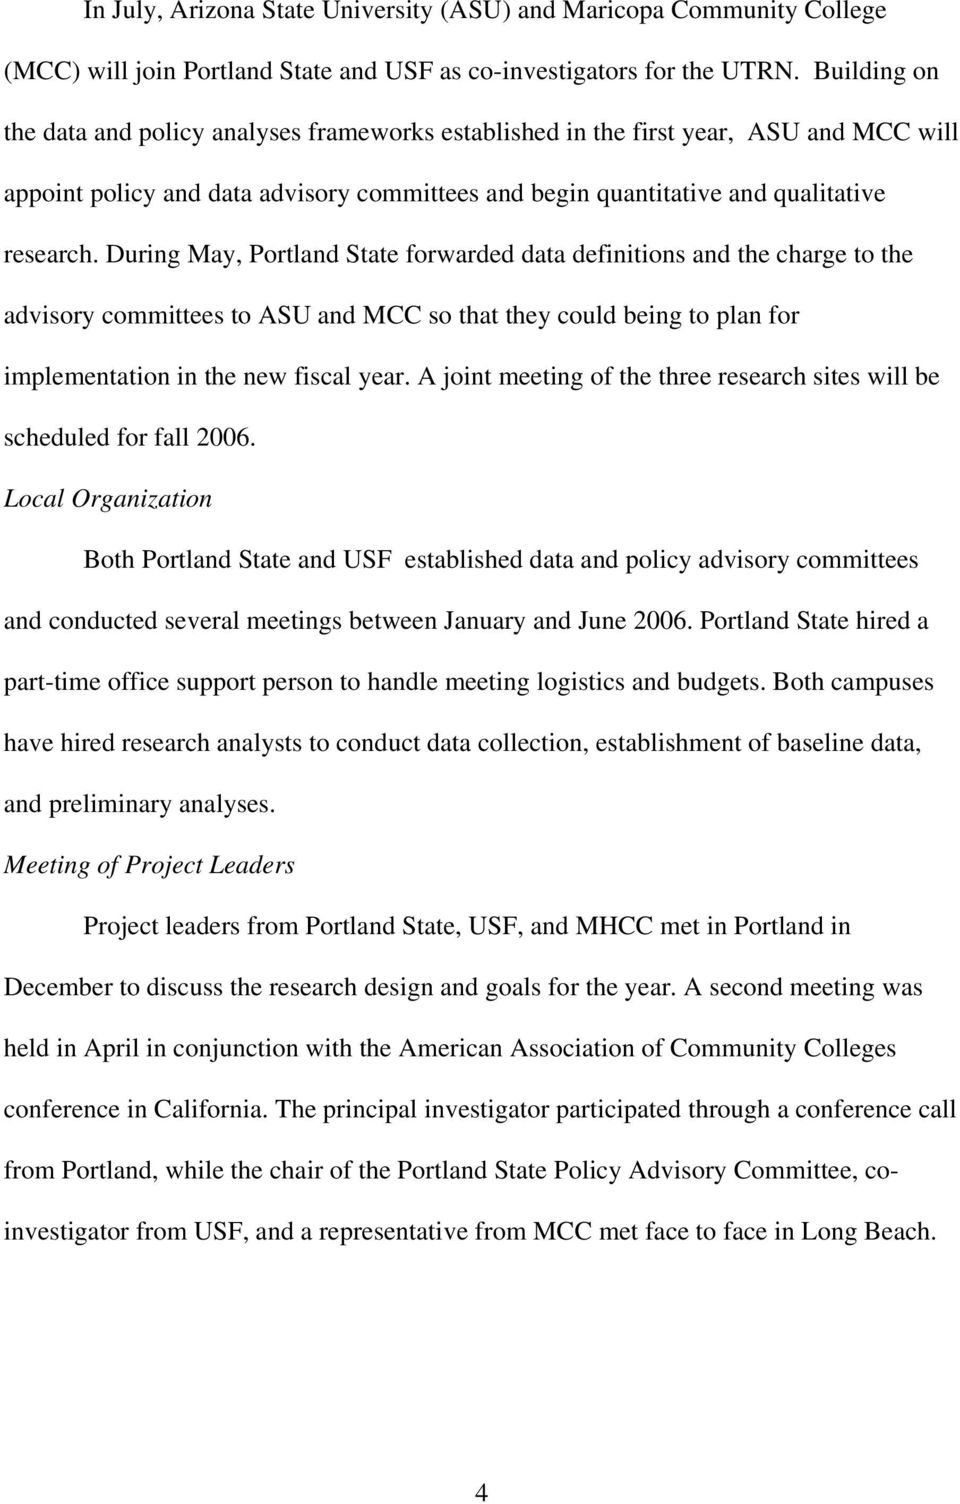 During May, Portland State forwarded data definitions and the charge to the advisory committees to ASU and MCC so that they could being to plan for implementation in the new fiscal year.